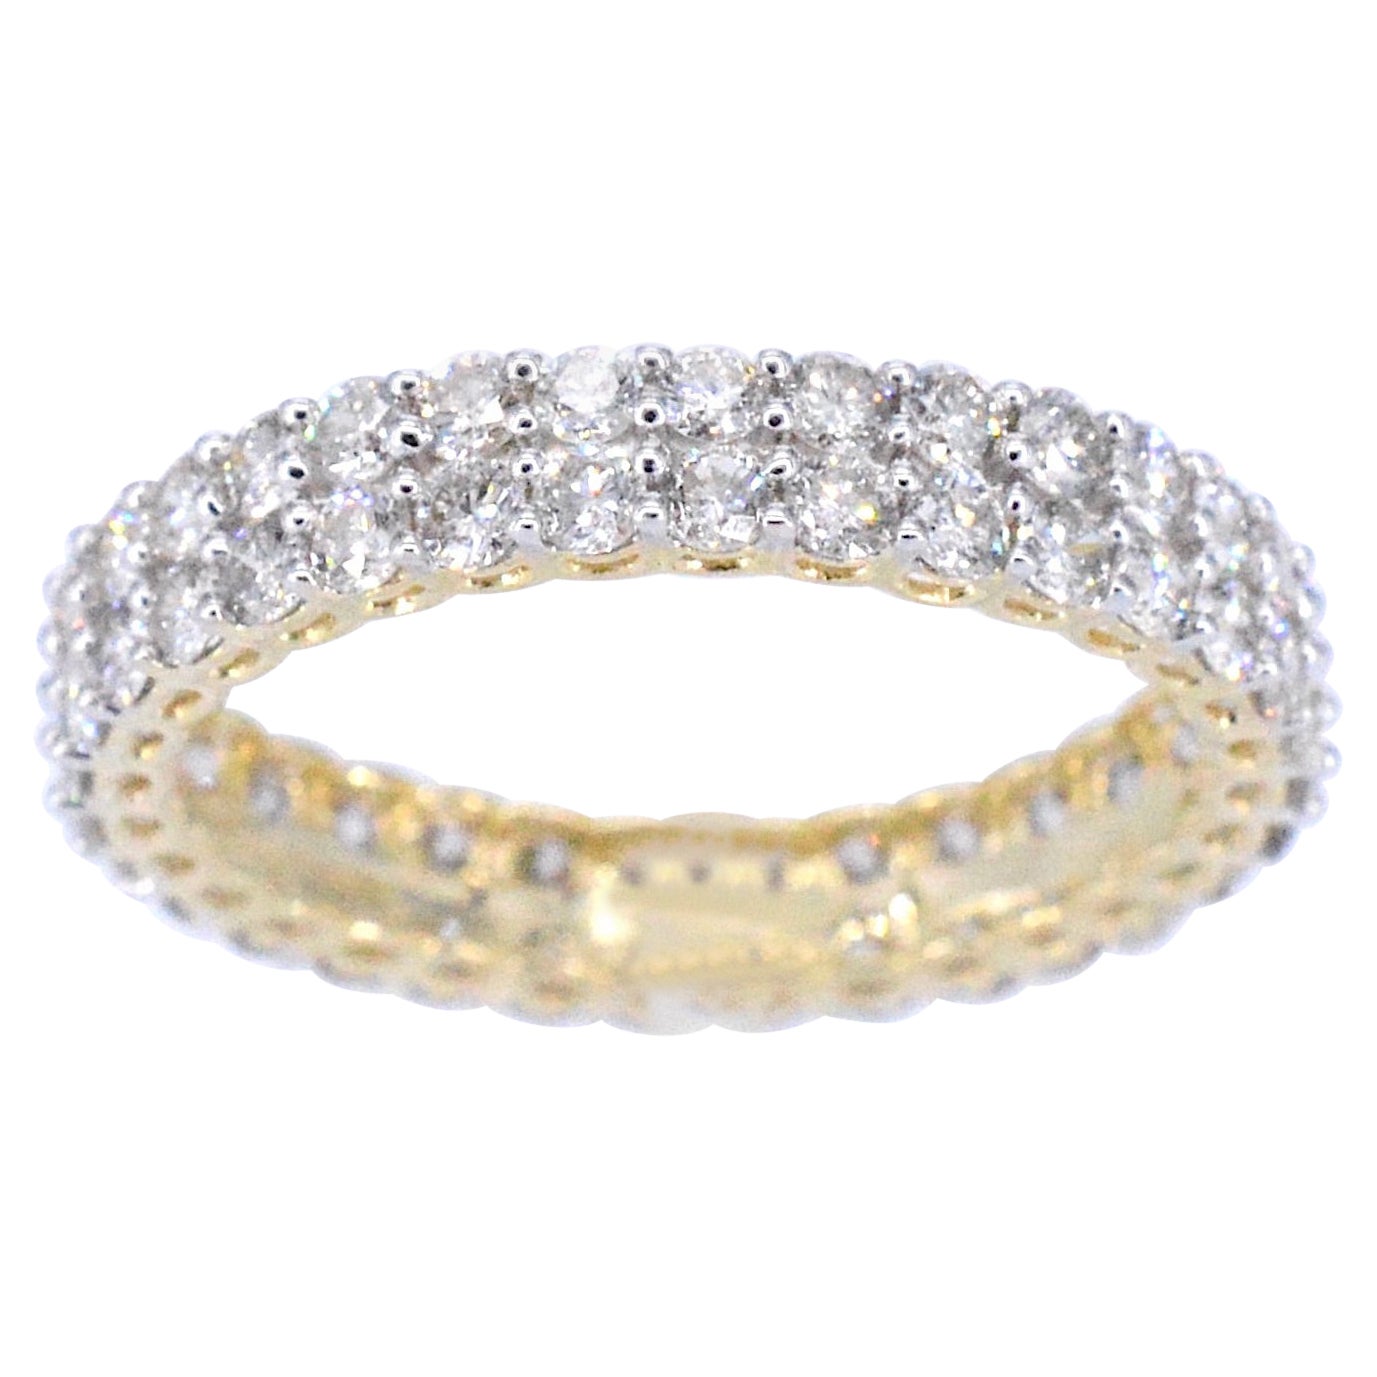 Double Gold Eternity Ring with Brilliant Cut Diamonds